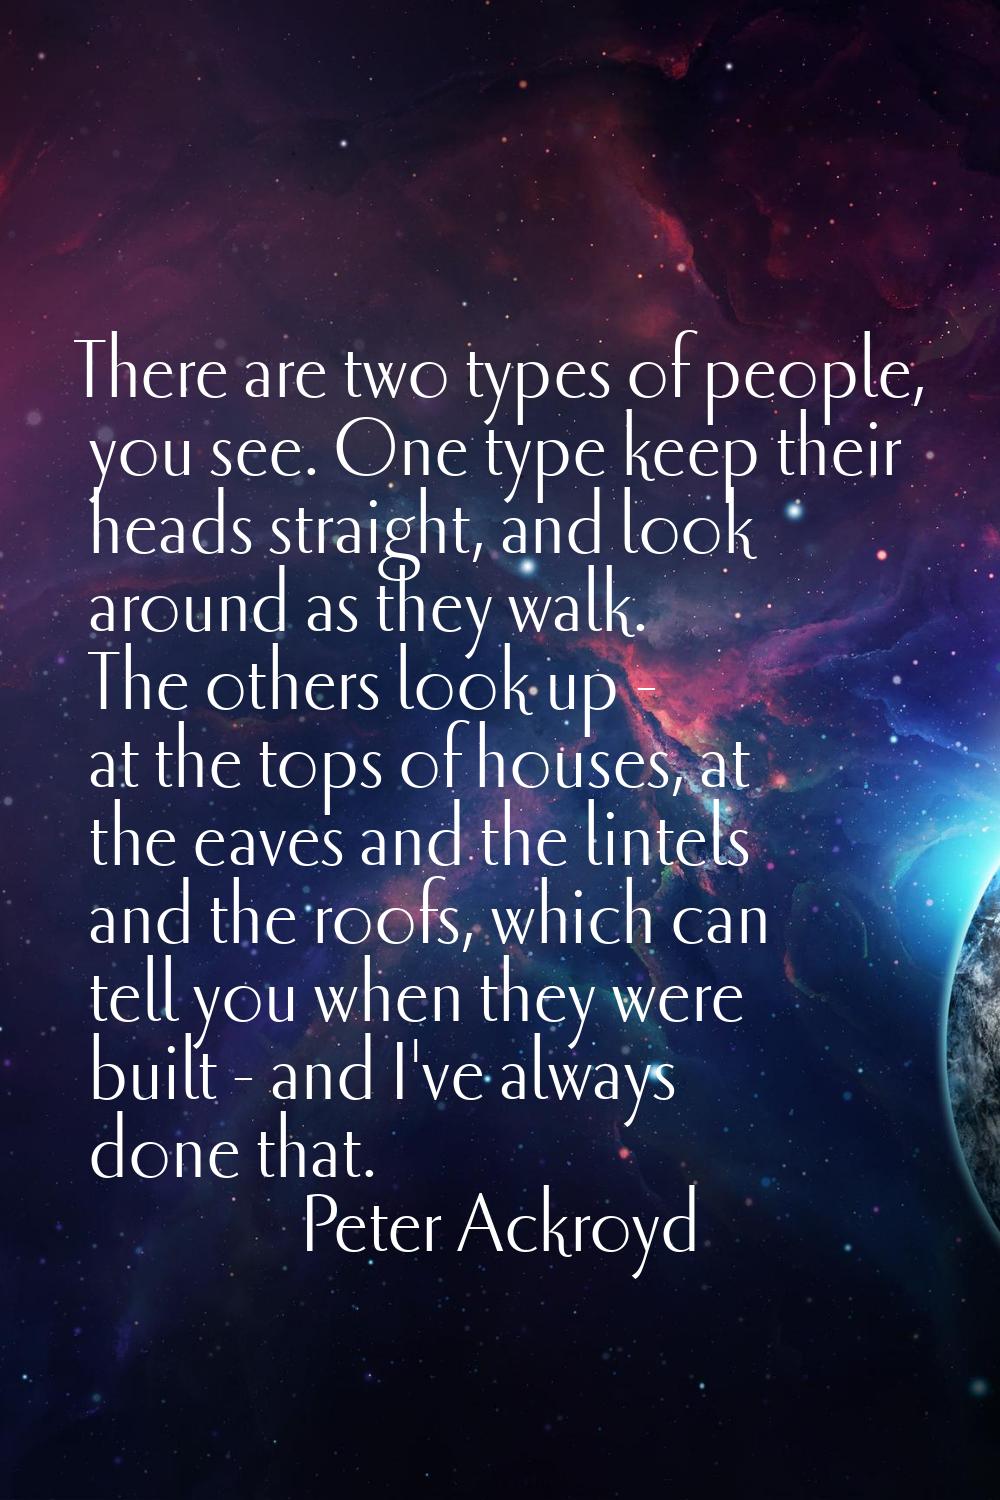 There are two types of people, you see. One type keep their heads straight, and look around as they